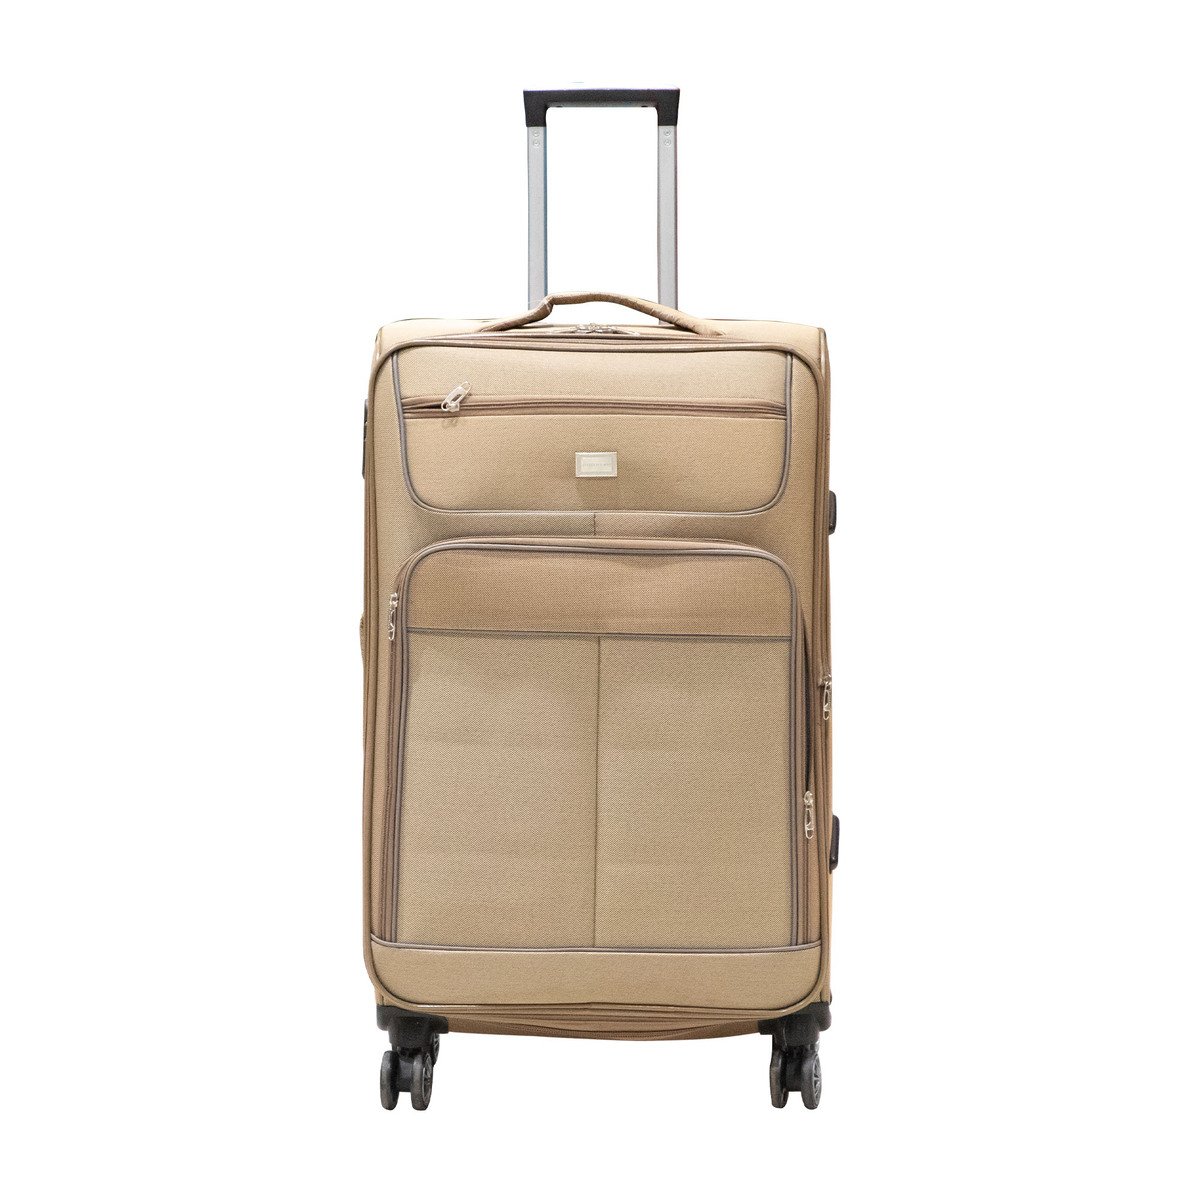 Giordano Soft Trolley 18004 24 inch Online at Best Price | October ...